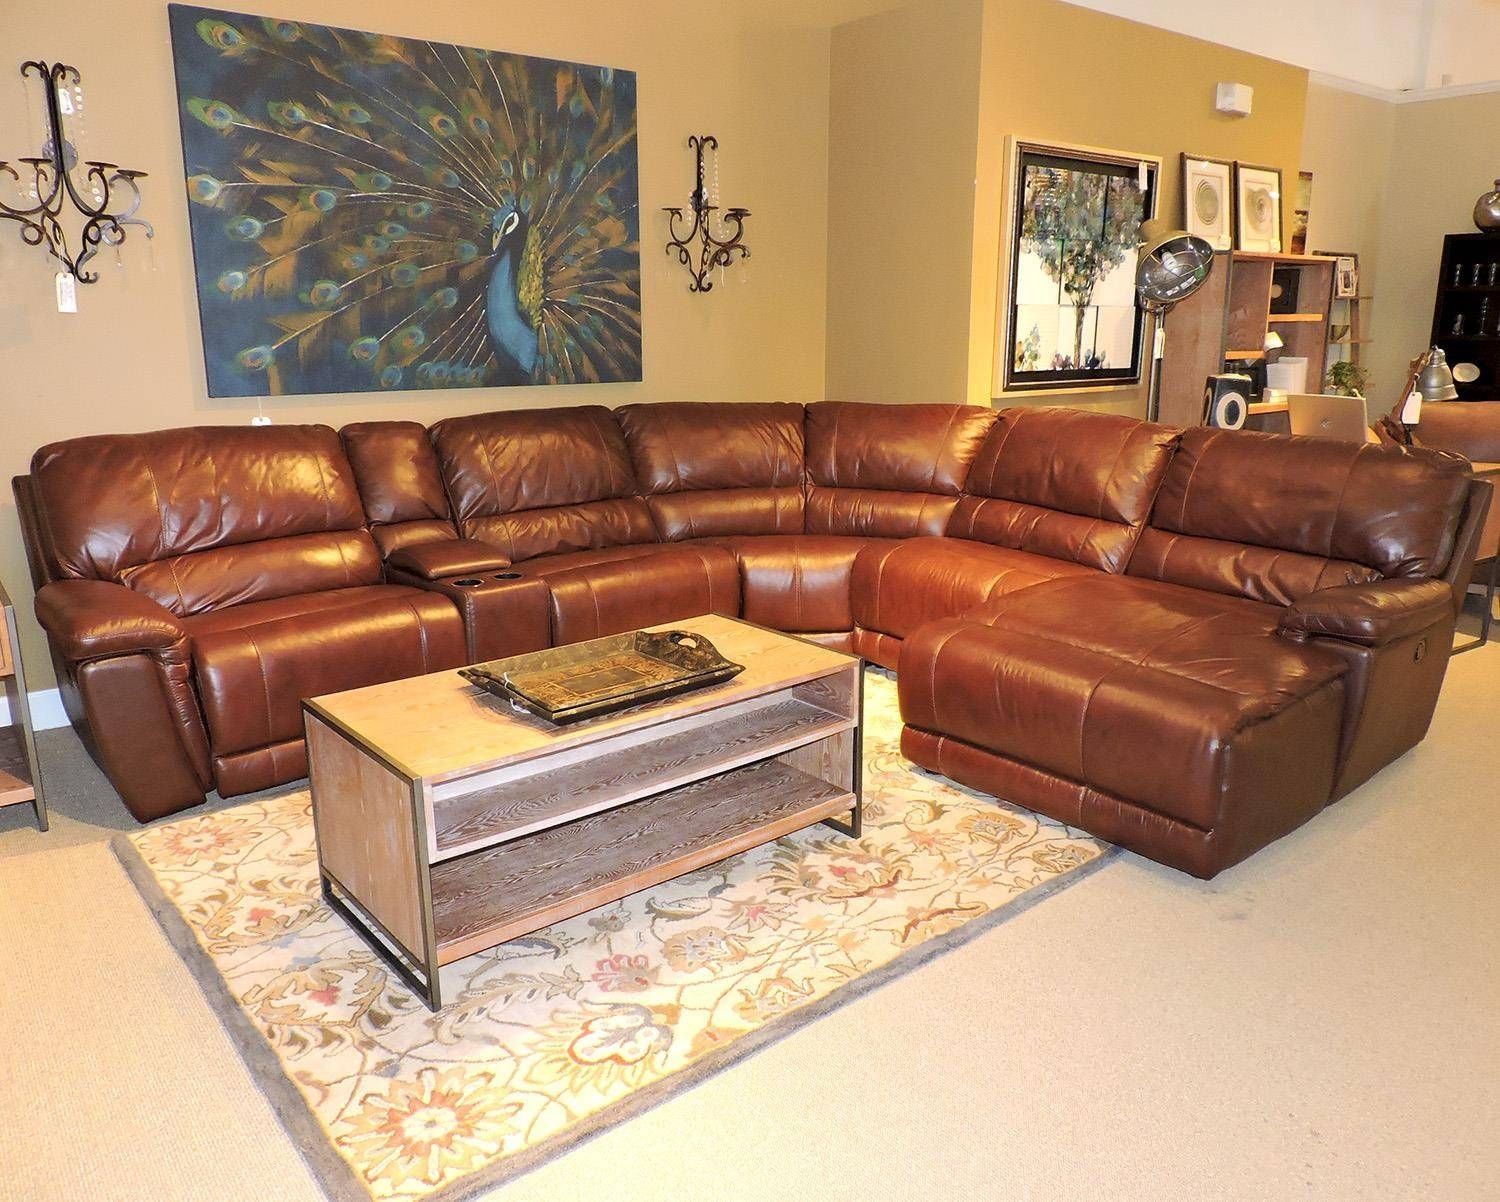 Sectional Sofas | Washington Dc, Northern Virginia, Maryland And Throughout Camel Colored Sectional Sofa (View 16 of 30)